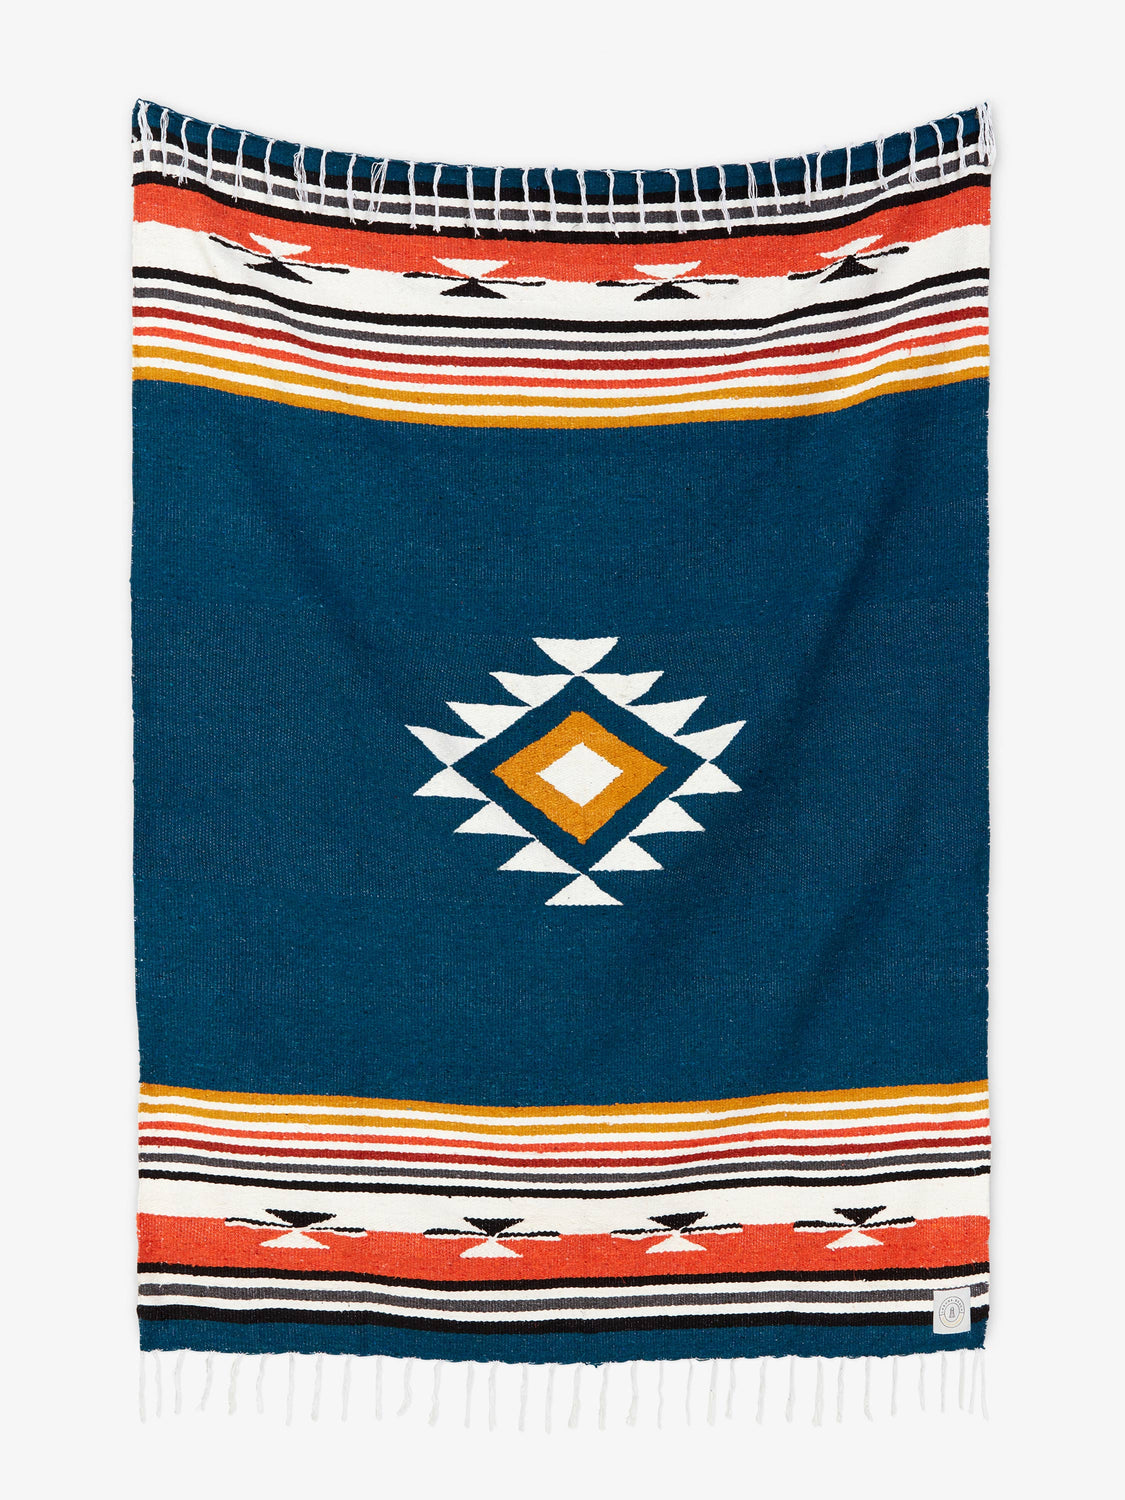 Oversized, traditional Mexican blanket in navy blue, red, and yellow pattern with white fringe spread out. 